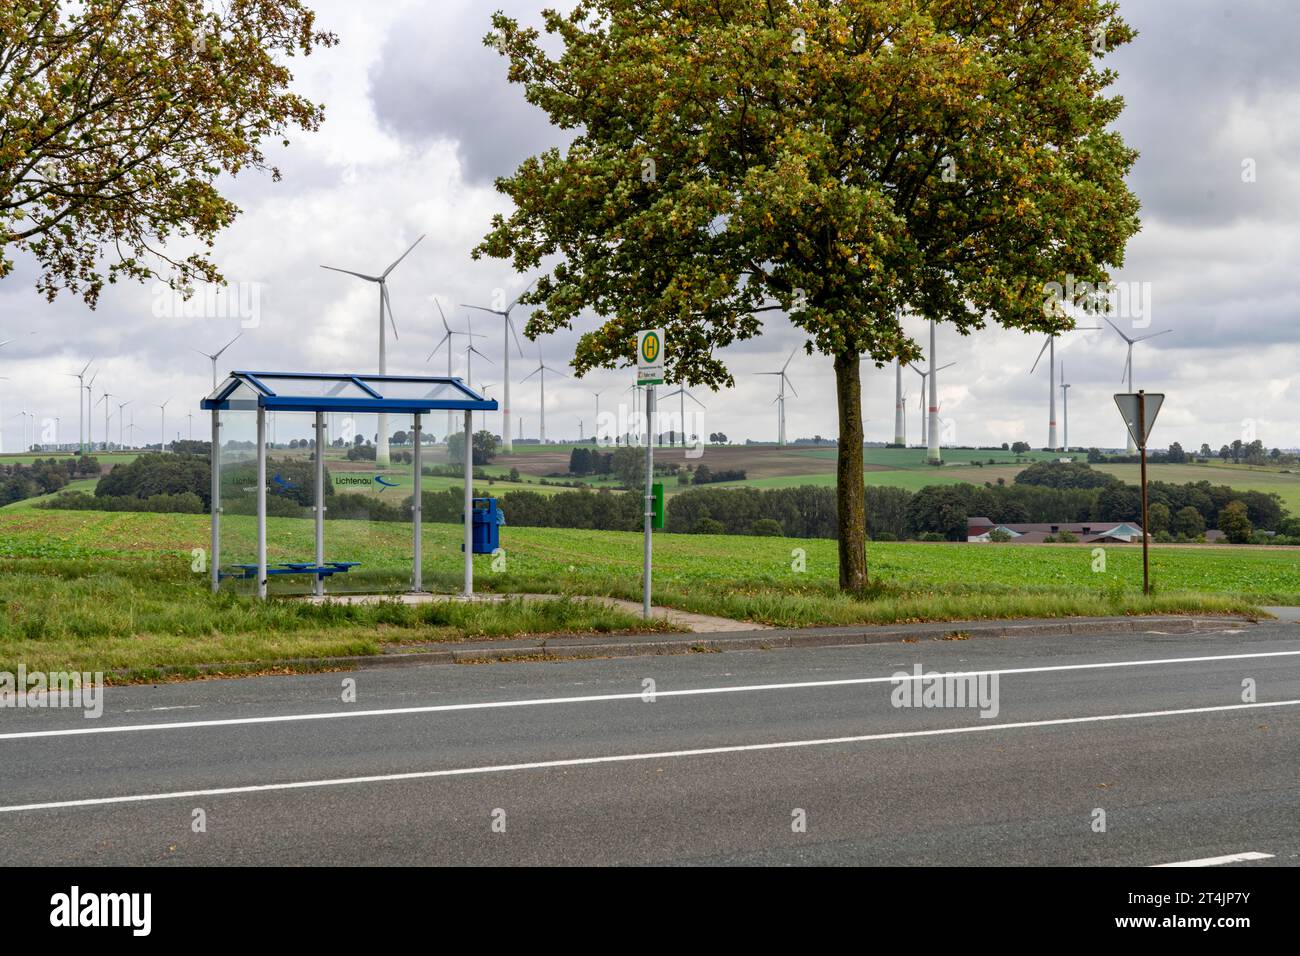 Bus stop in the countryside, on the B68, new, modern bus shelter, line to Warburg, East Westphalia Lippe, bus line S 85, Grundsteinheimer Weg stop, no Stock Photo